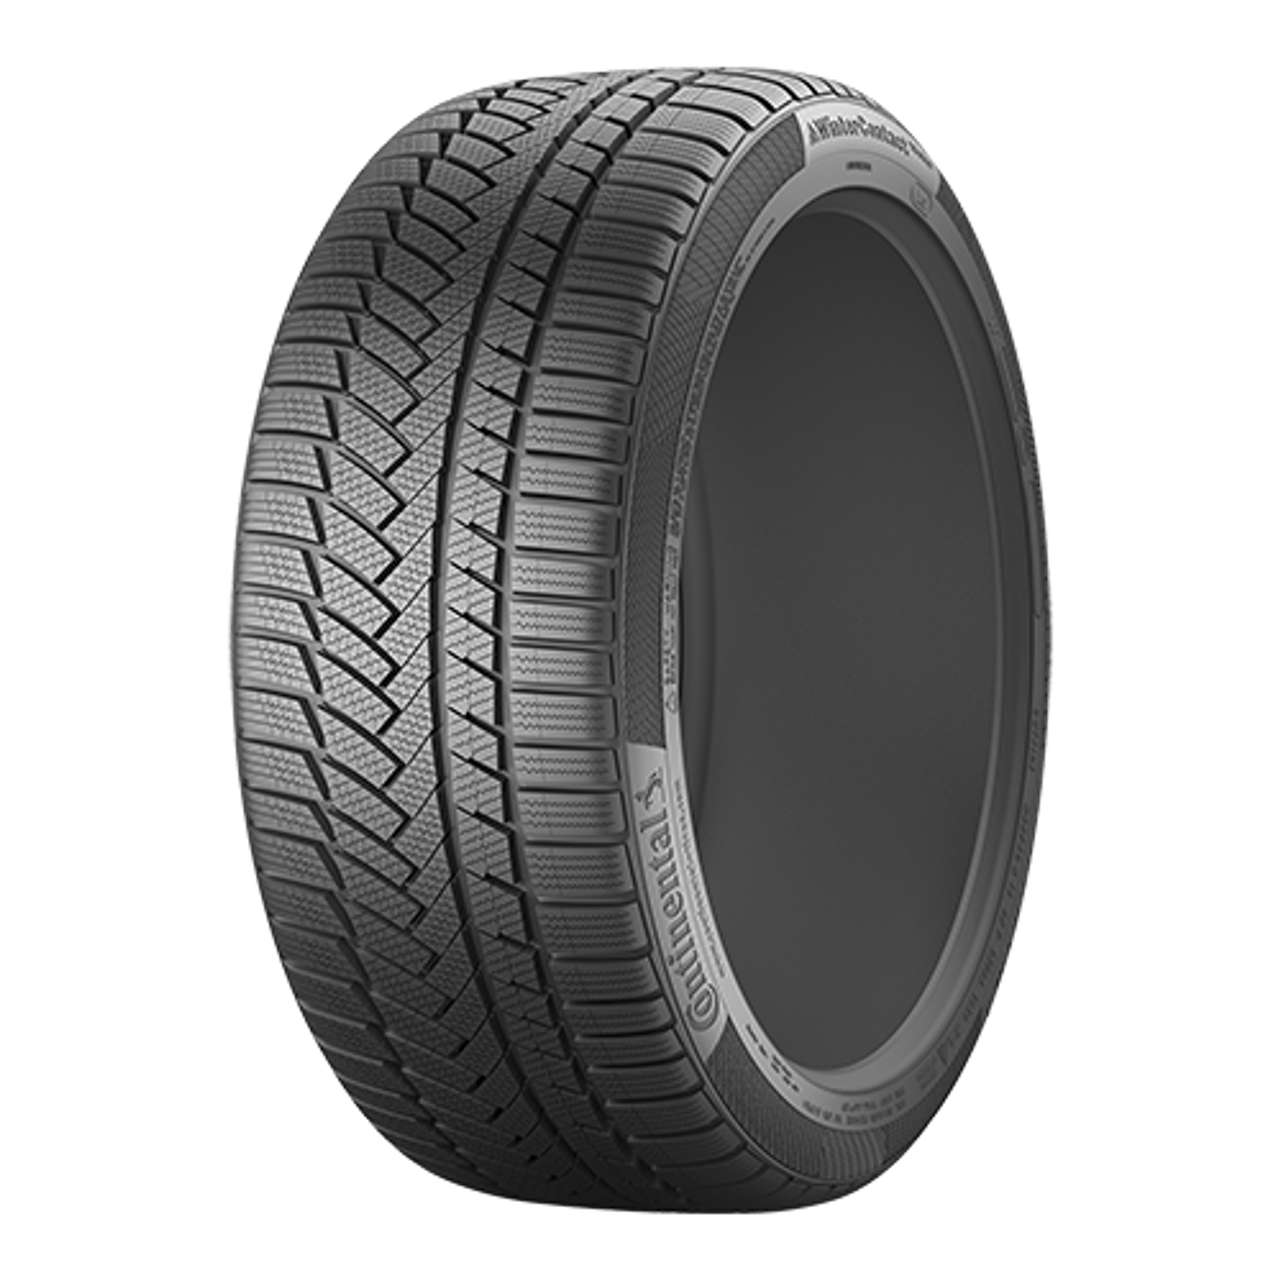 CONTINENTAL WINTERCONTACT TS 850 P (+) (EVc) 255/55R18 105T BSW